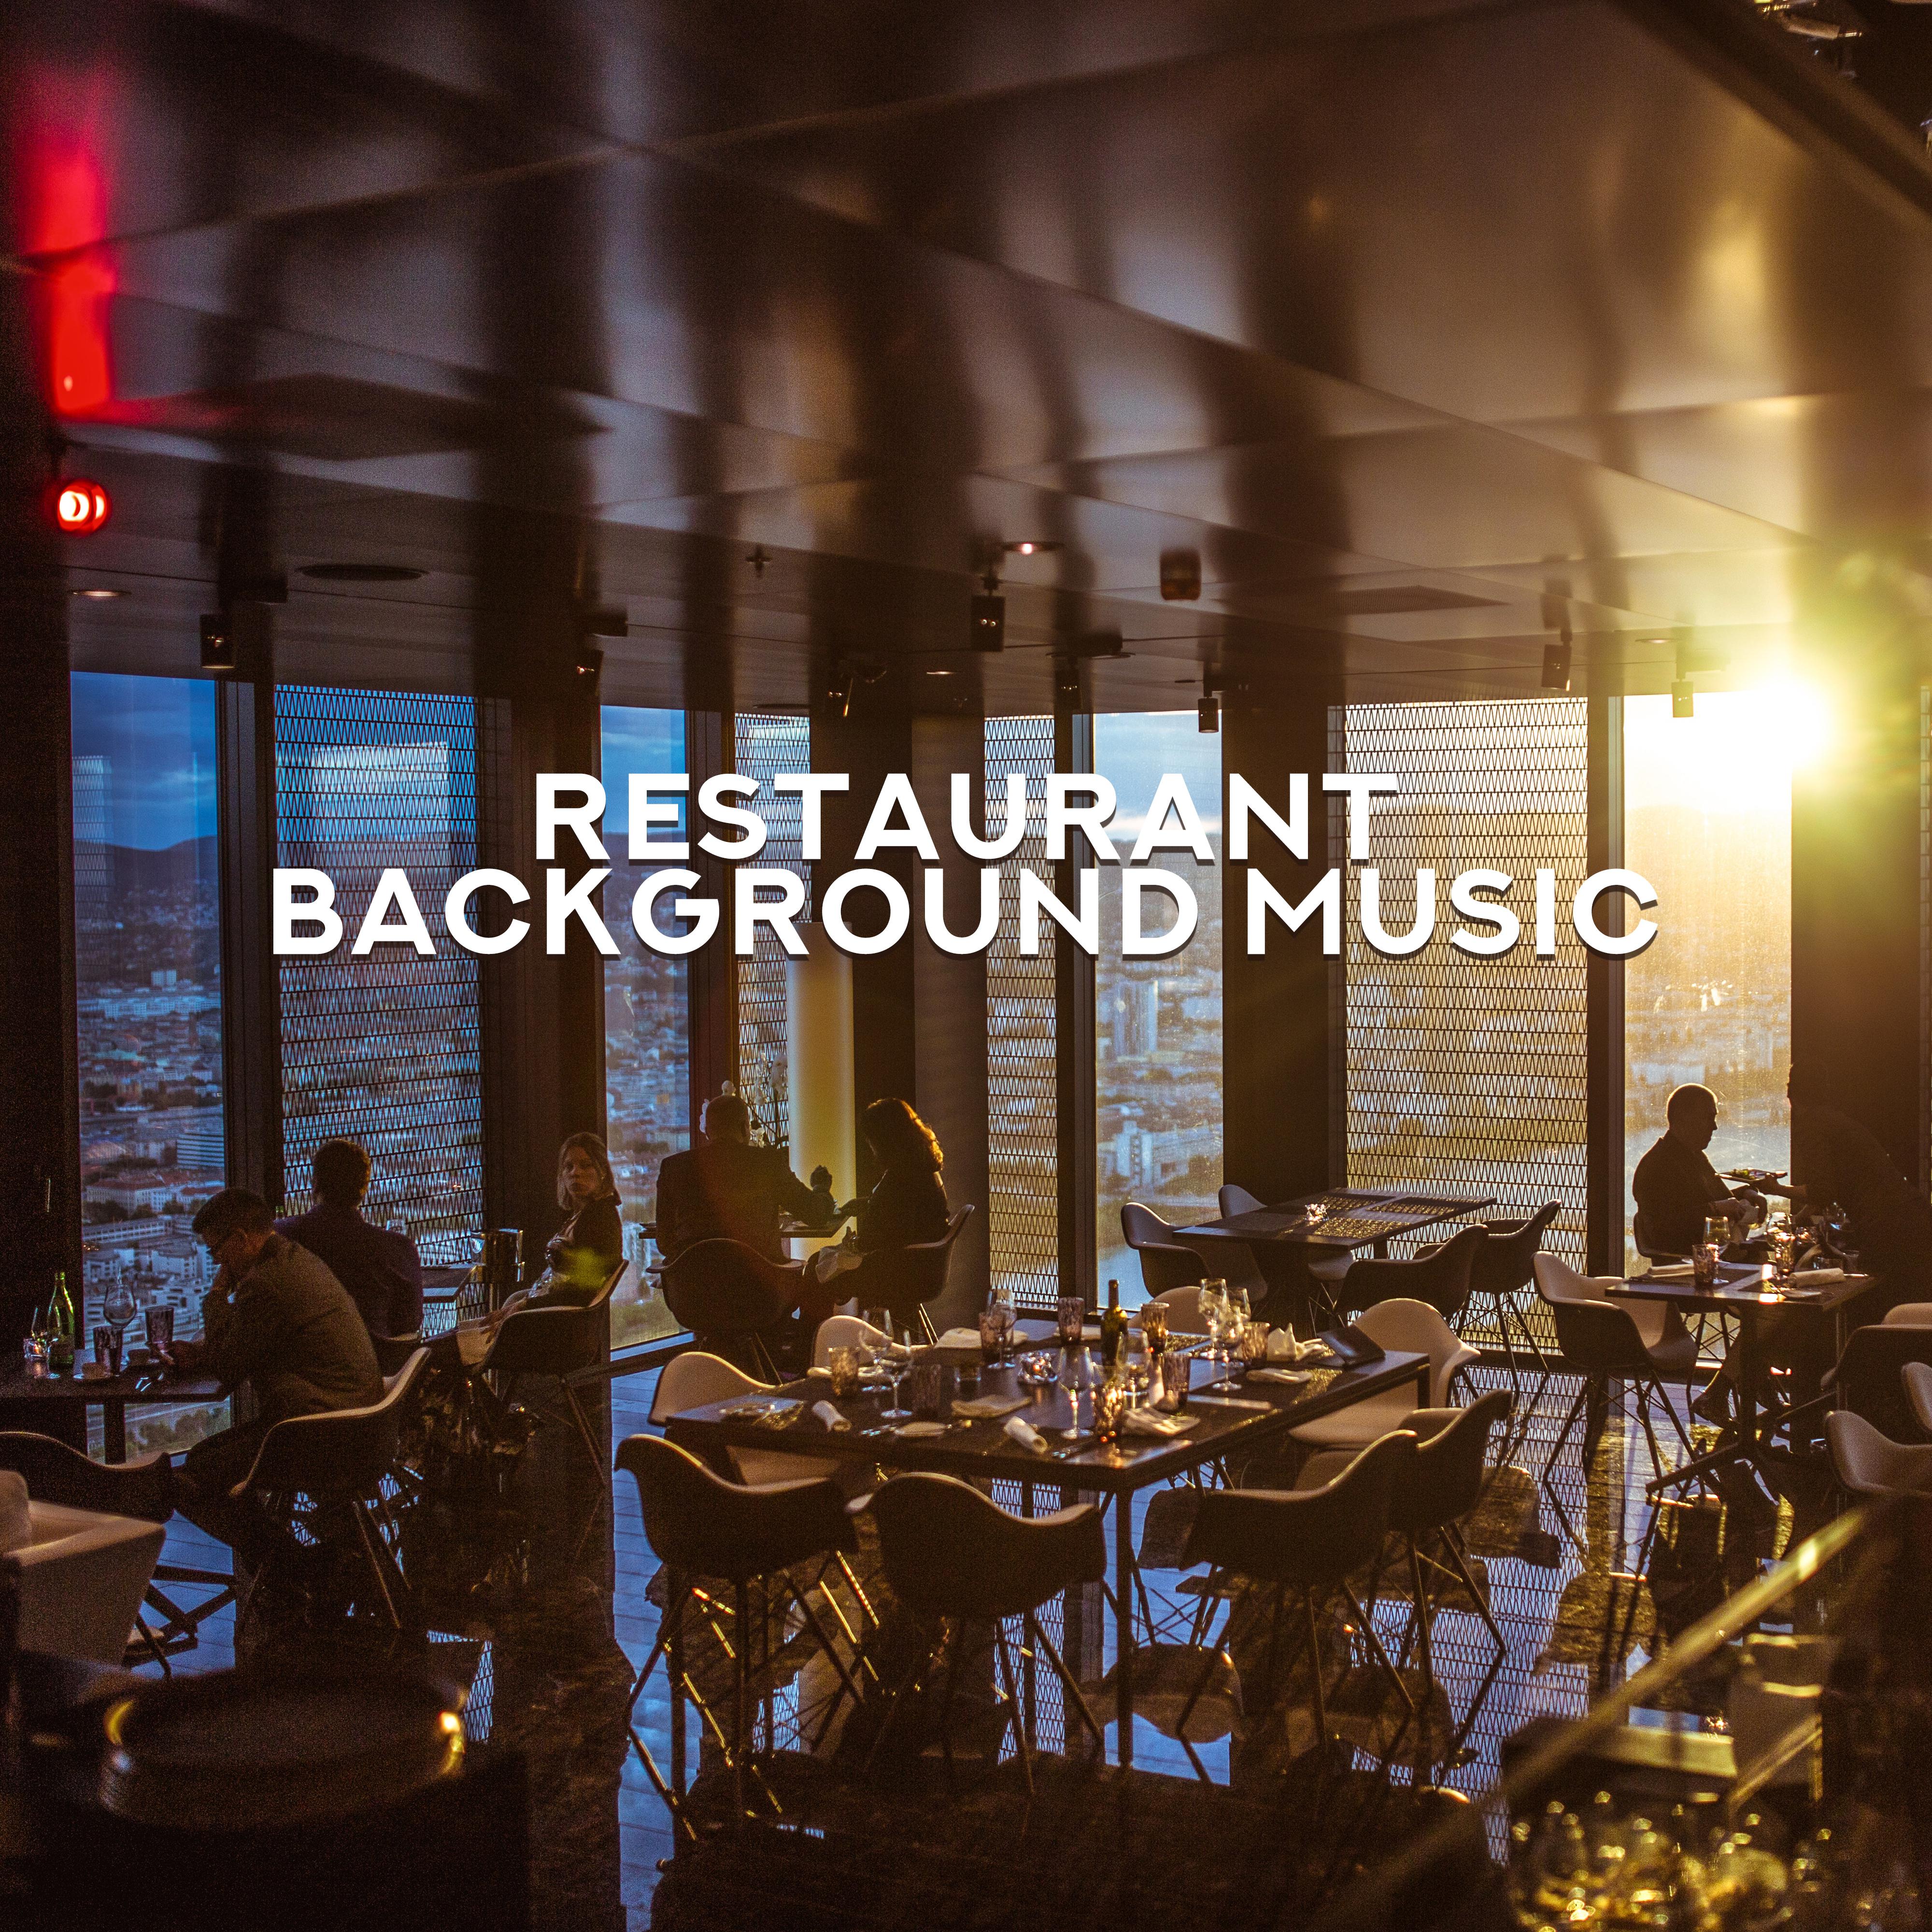 Restaurant Background Music  Dinner Melodies, Restaurant Songs for Relaxation, Jazz Lounge, Smooth Music to Rest